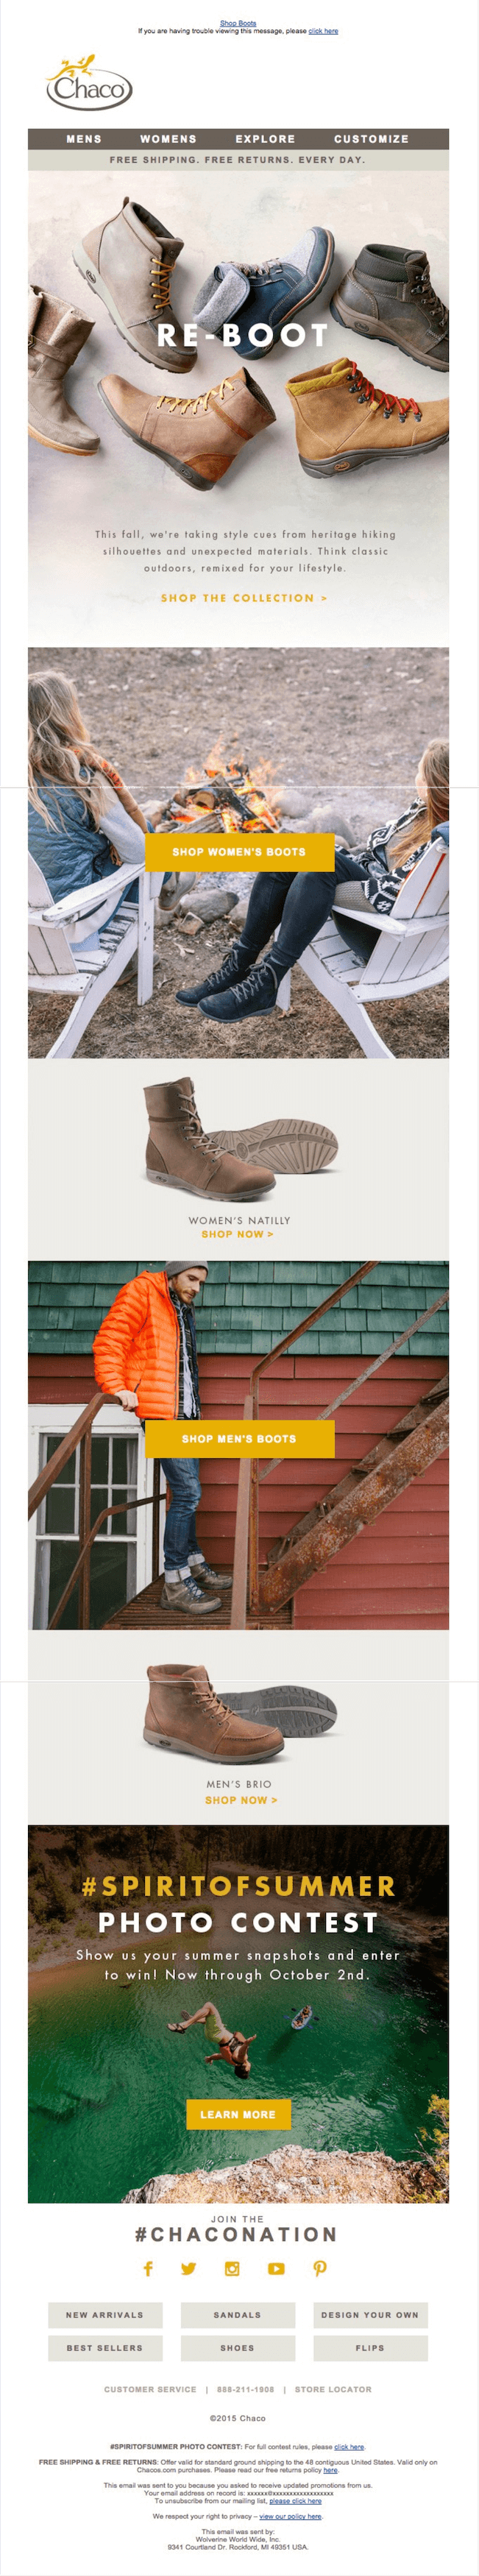 Chaco boots fall fashion newsletter